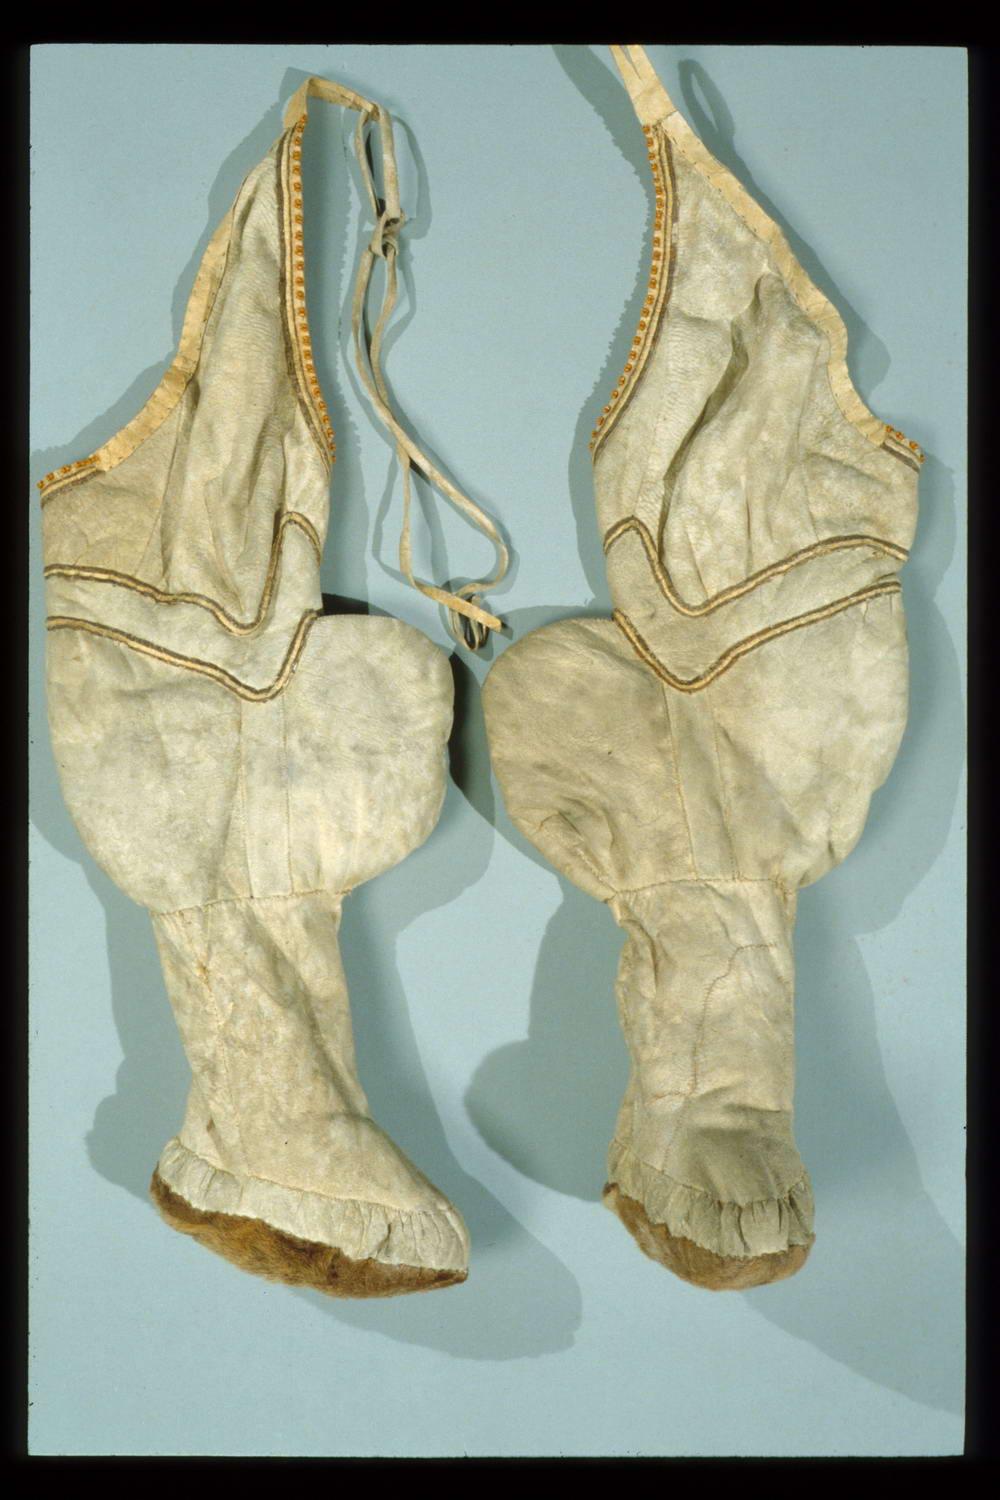 Light brown caribou-skin leggings with furred soles and decorative stitching around the thigh area, which is much less fitted than the boot portion of the leggings.